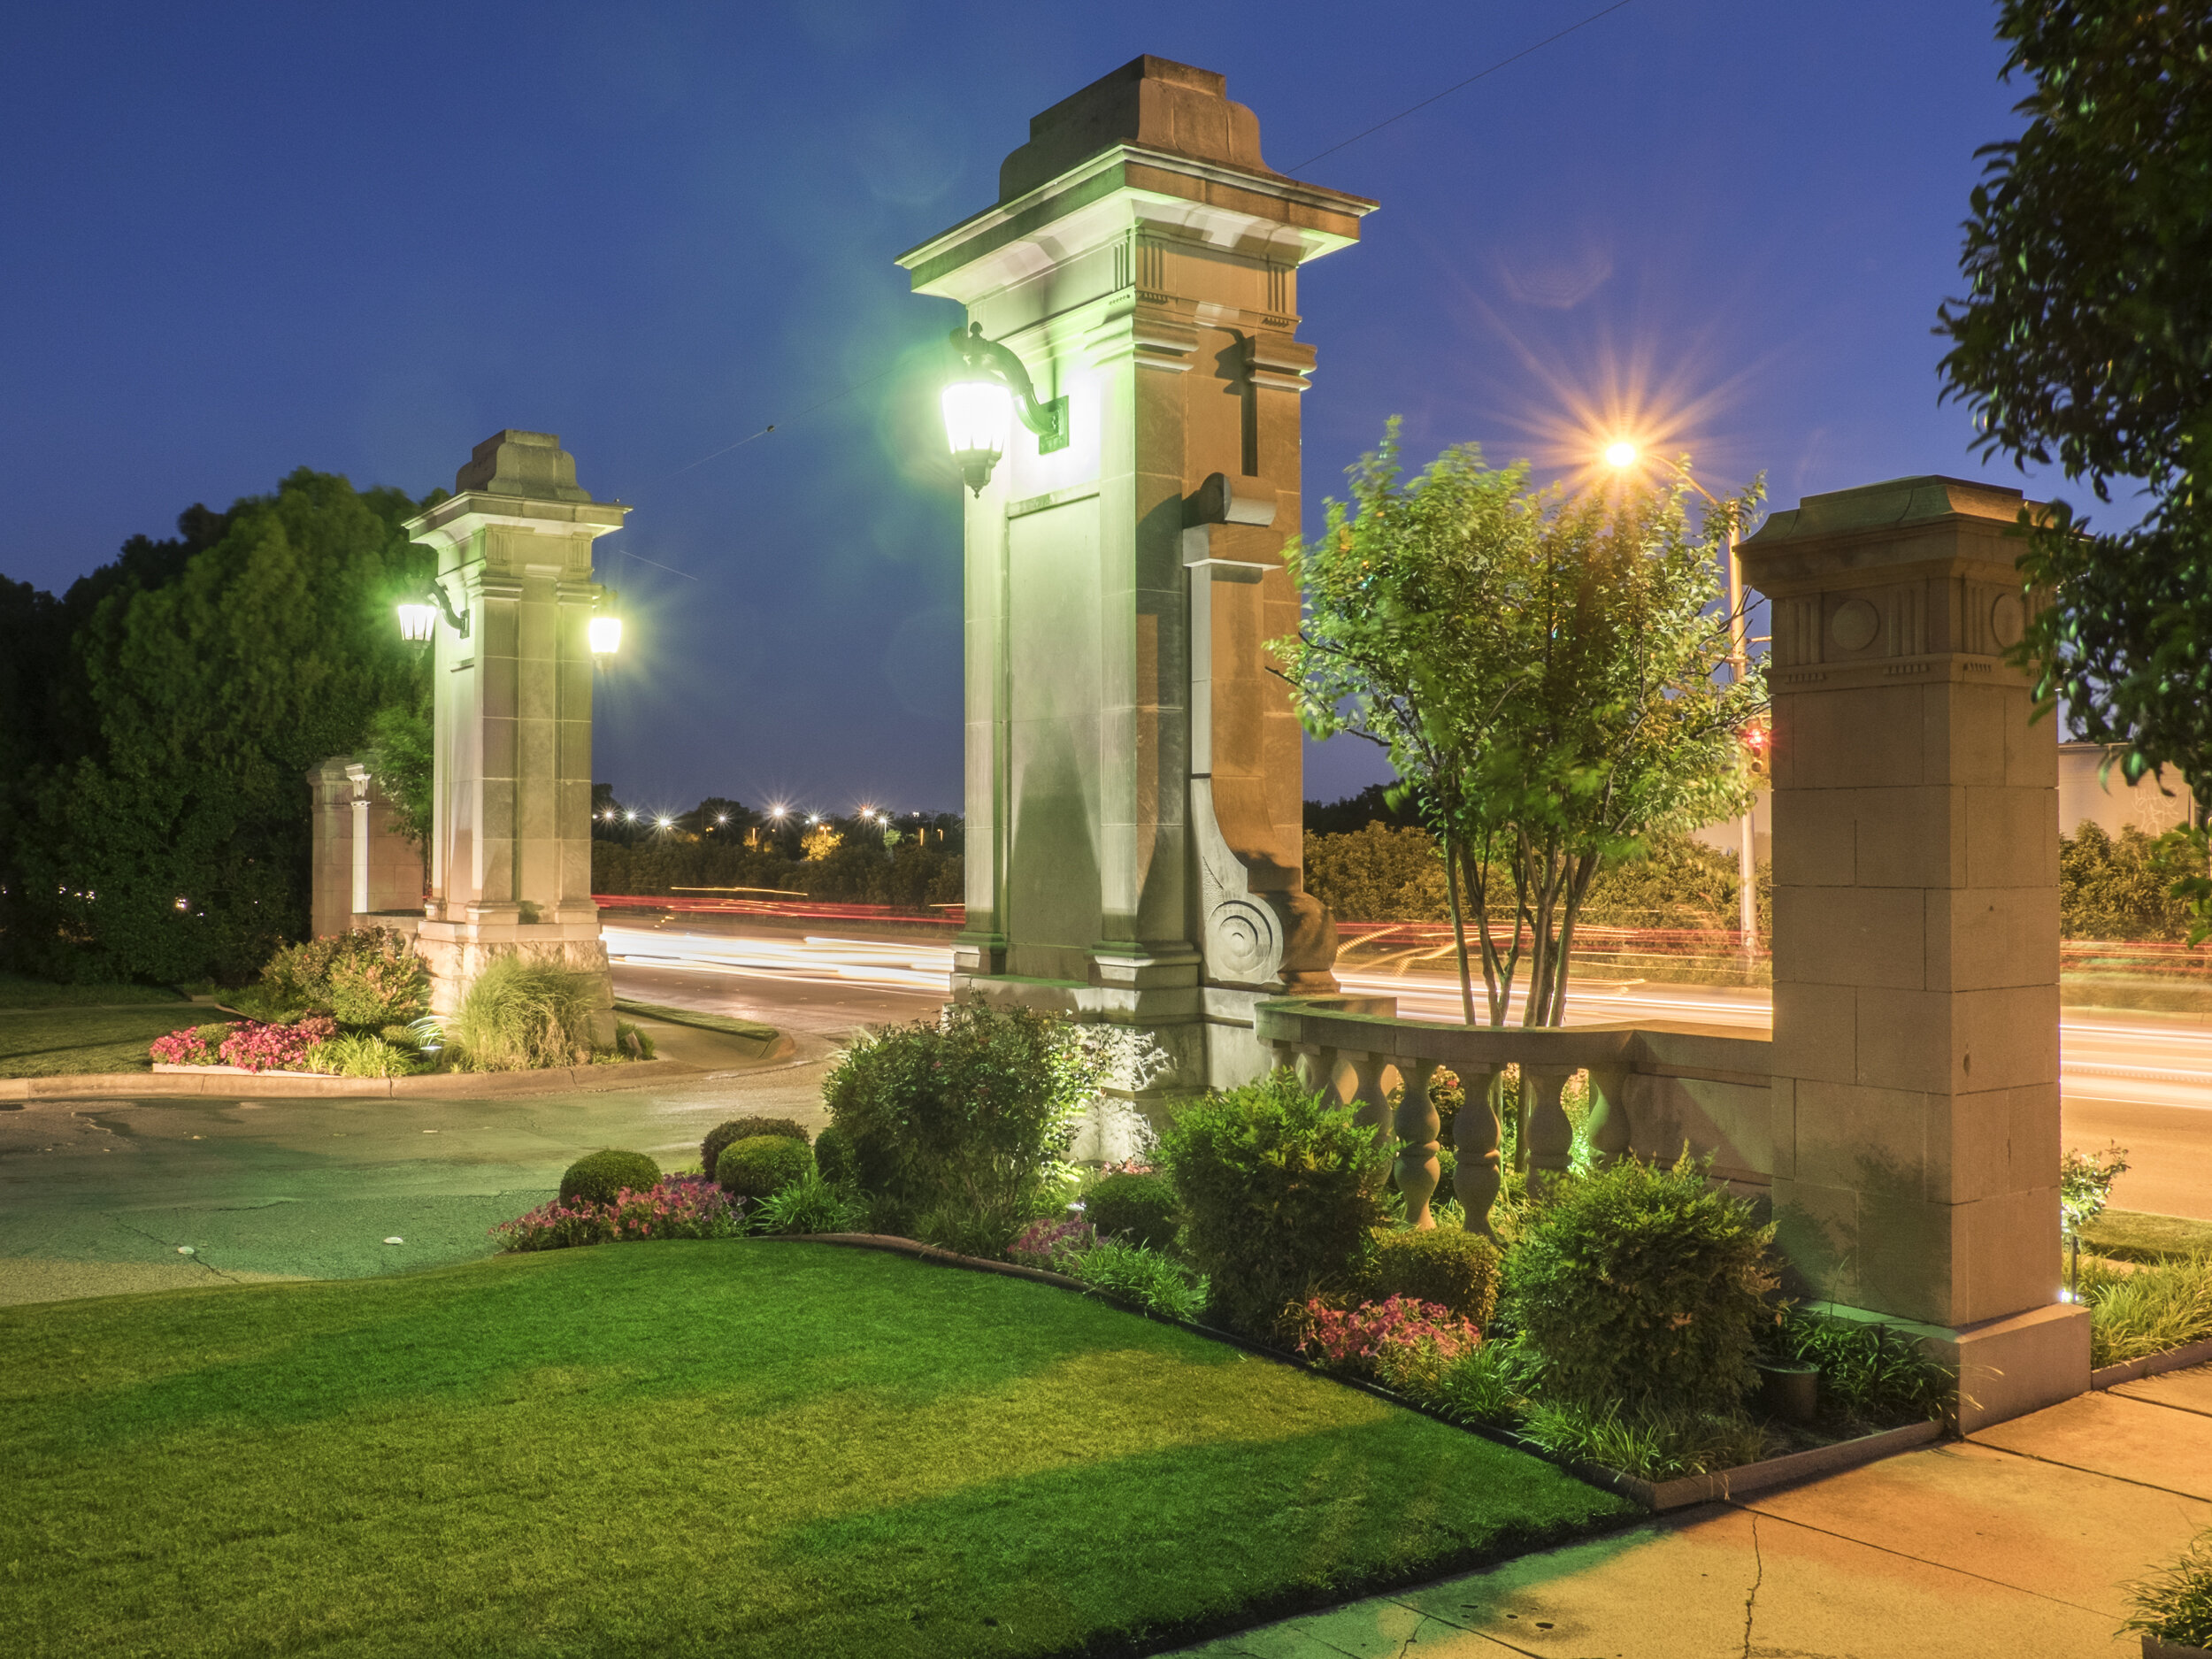   The perfect neighborhood    Ryan Place   Fort Worth    Learn More  